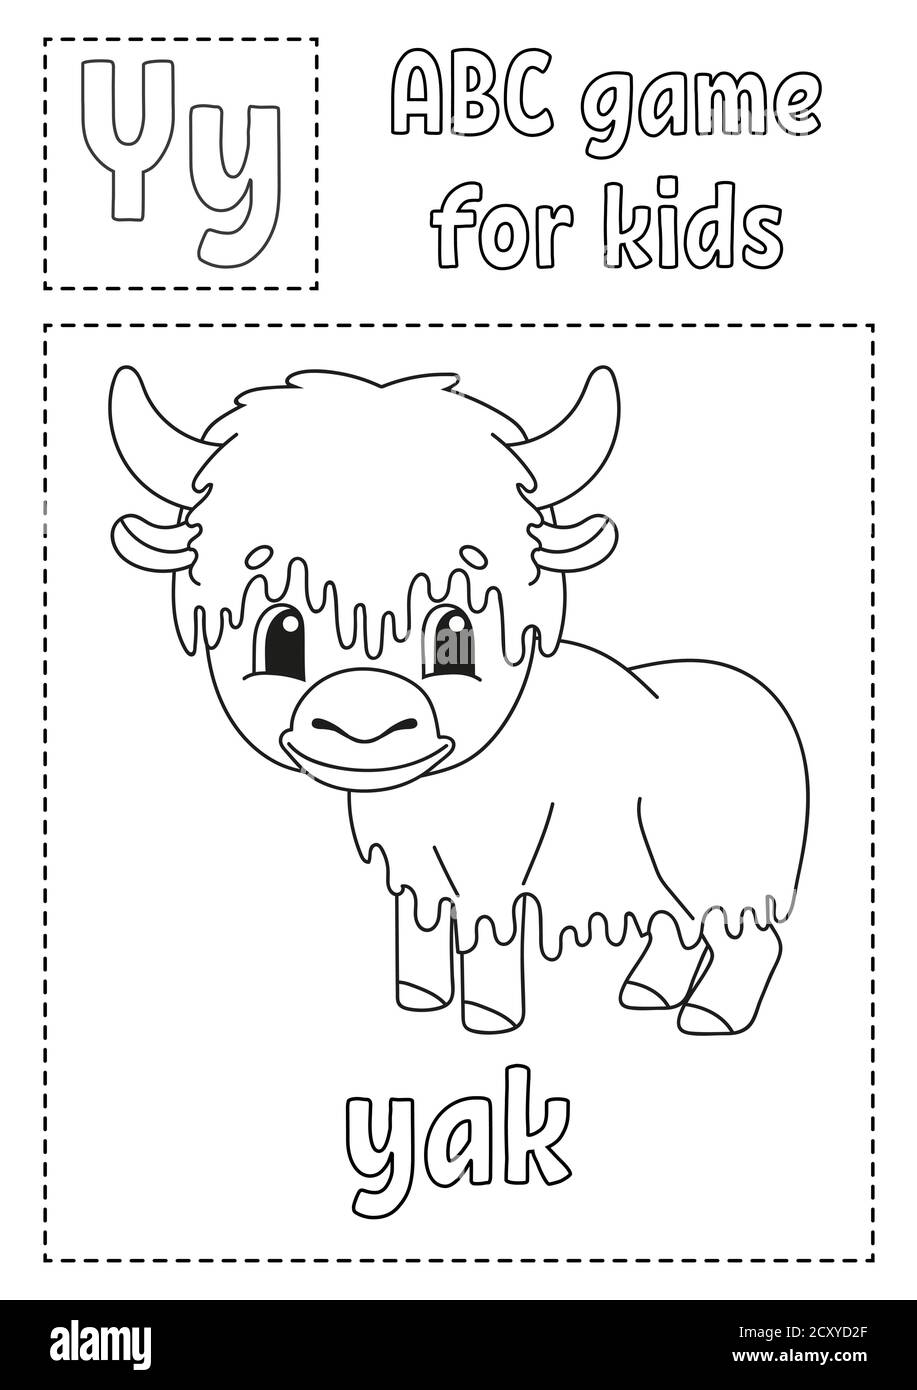 Letter Y Is For Yak Abc Game For Kids Alphabet Coloring Page Cartoon Character Word And Letter Vector Illustration Stock Vector Image Art Alamy